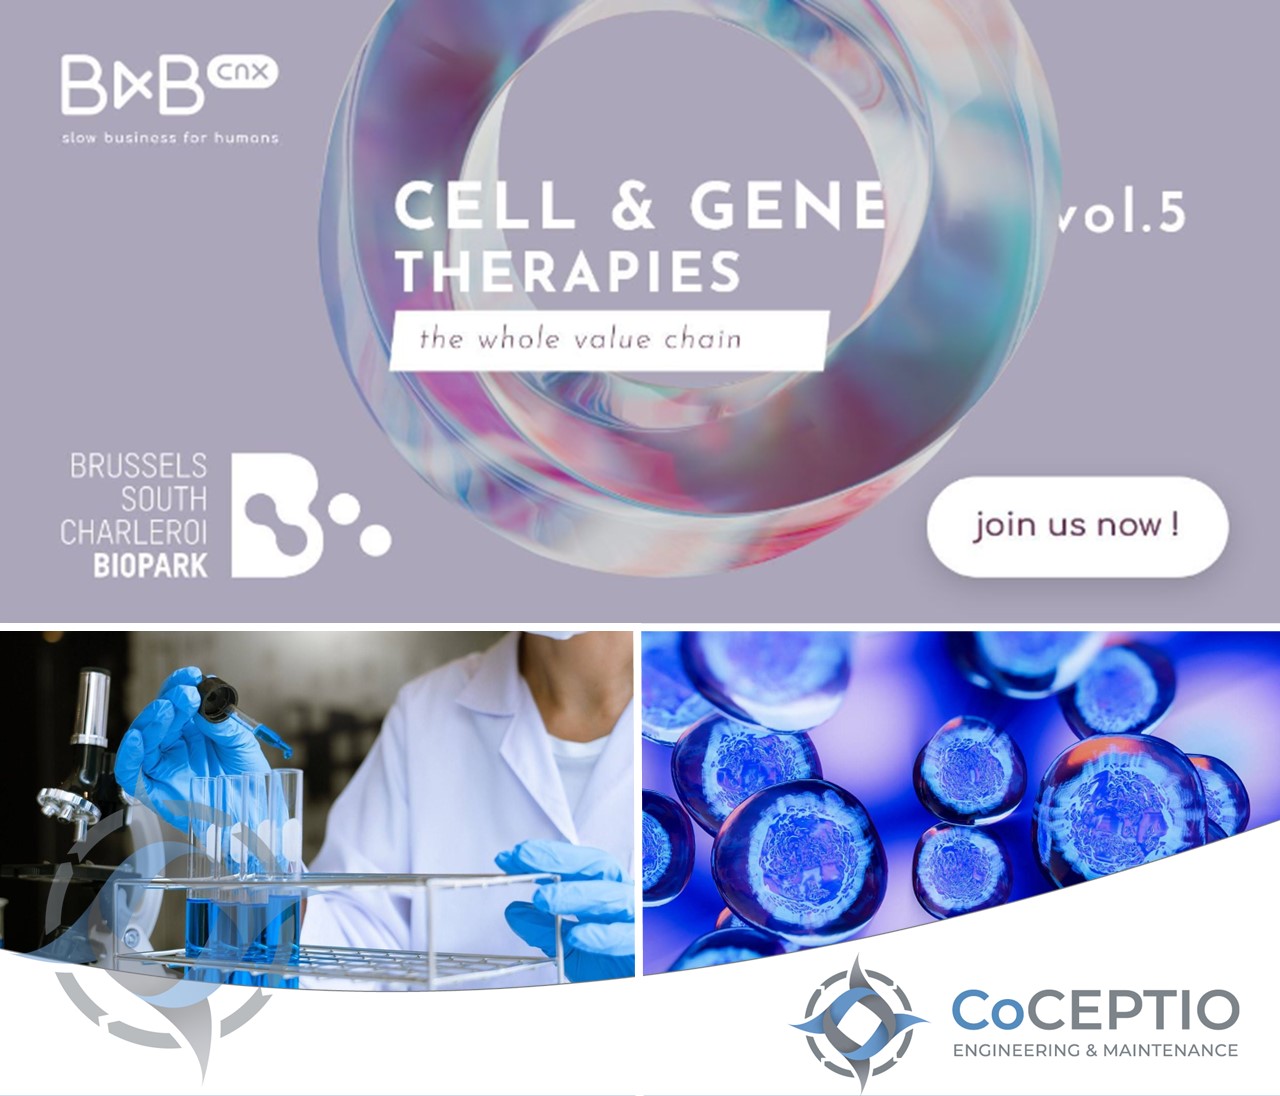 Cell & Gene Therapies vol.5